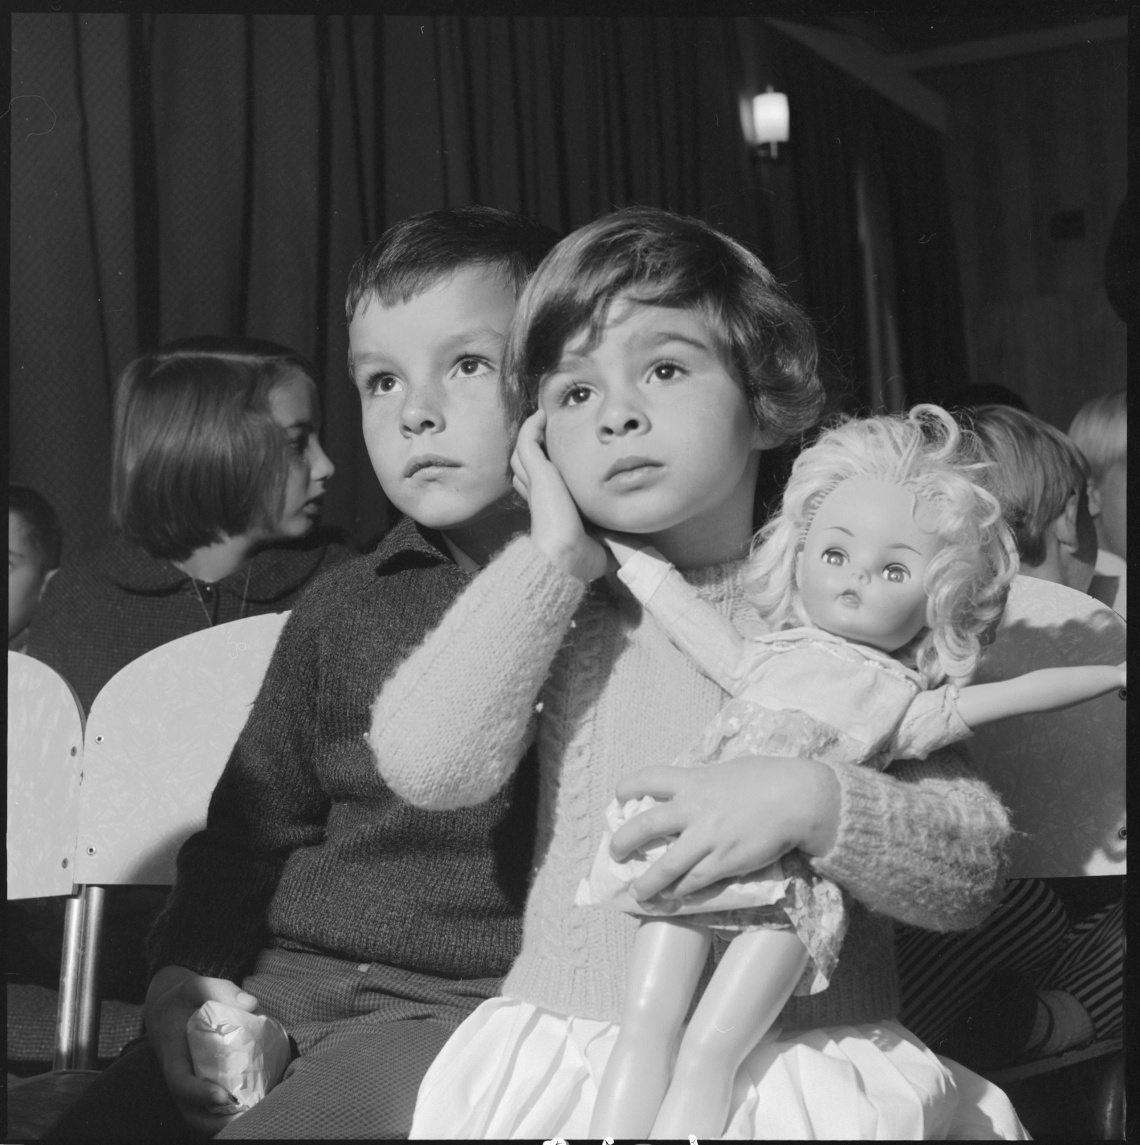 Children engrossed in a film show 1968